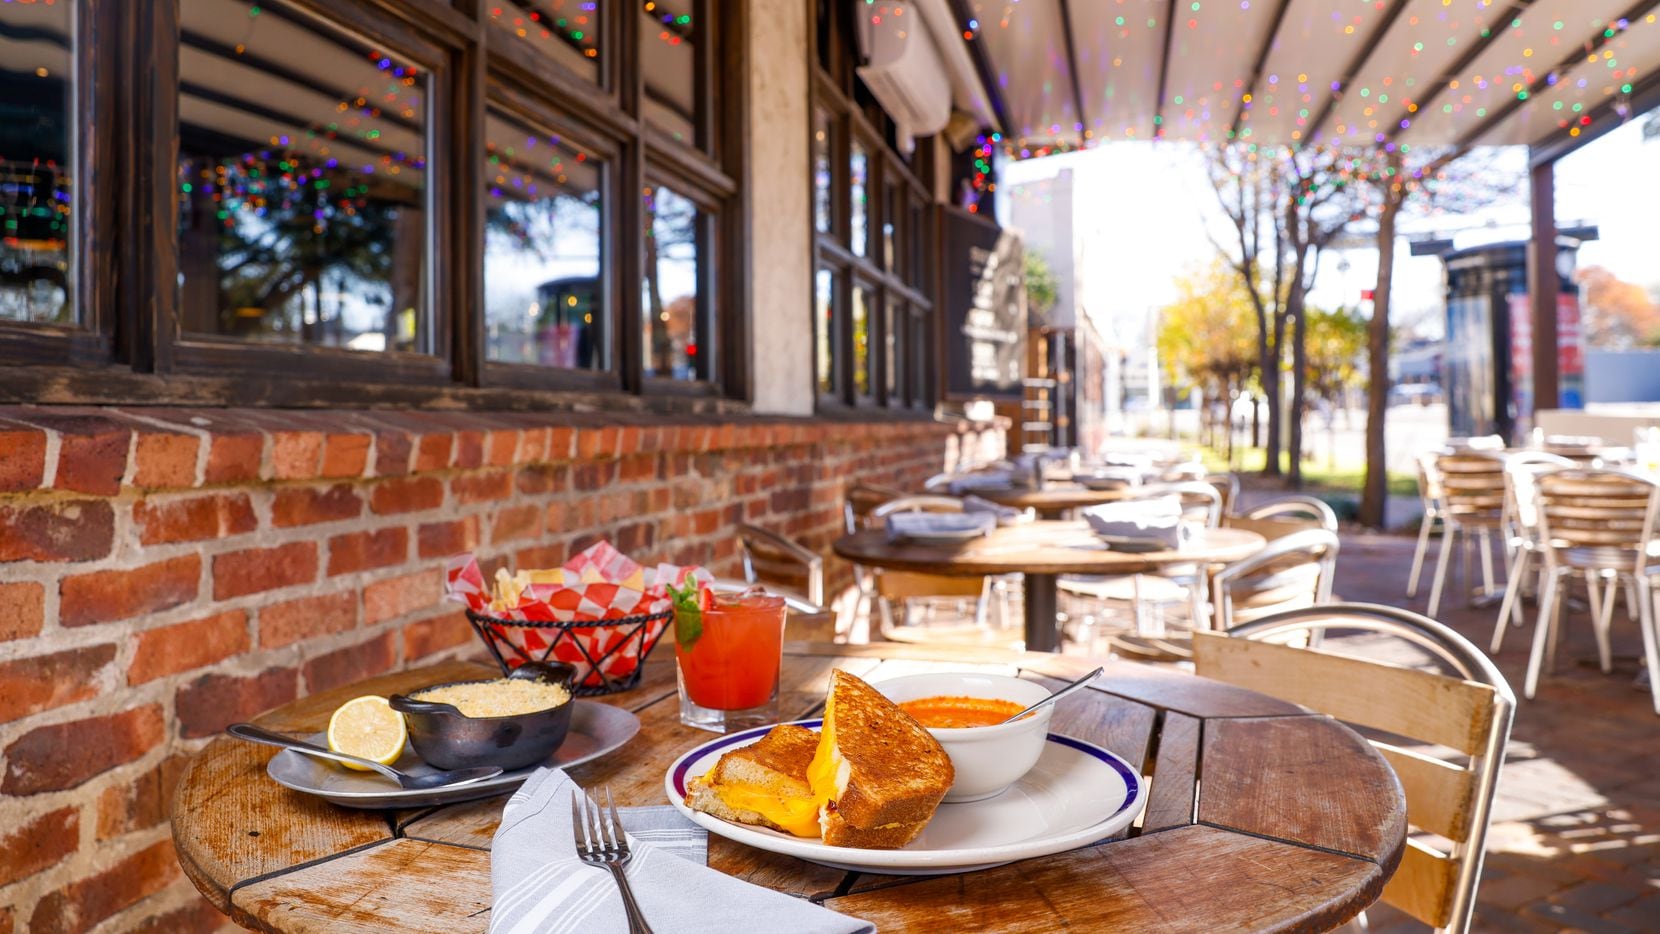 The Porch has a new porch. Coming in 2023 for this Dallas brunch restaurant: a new beer...